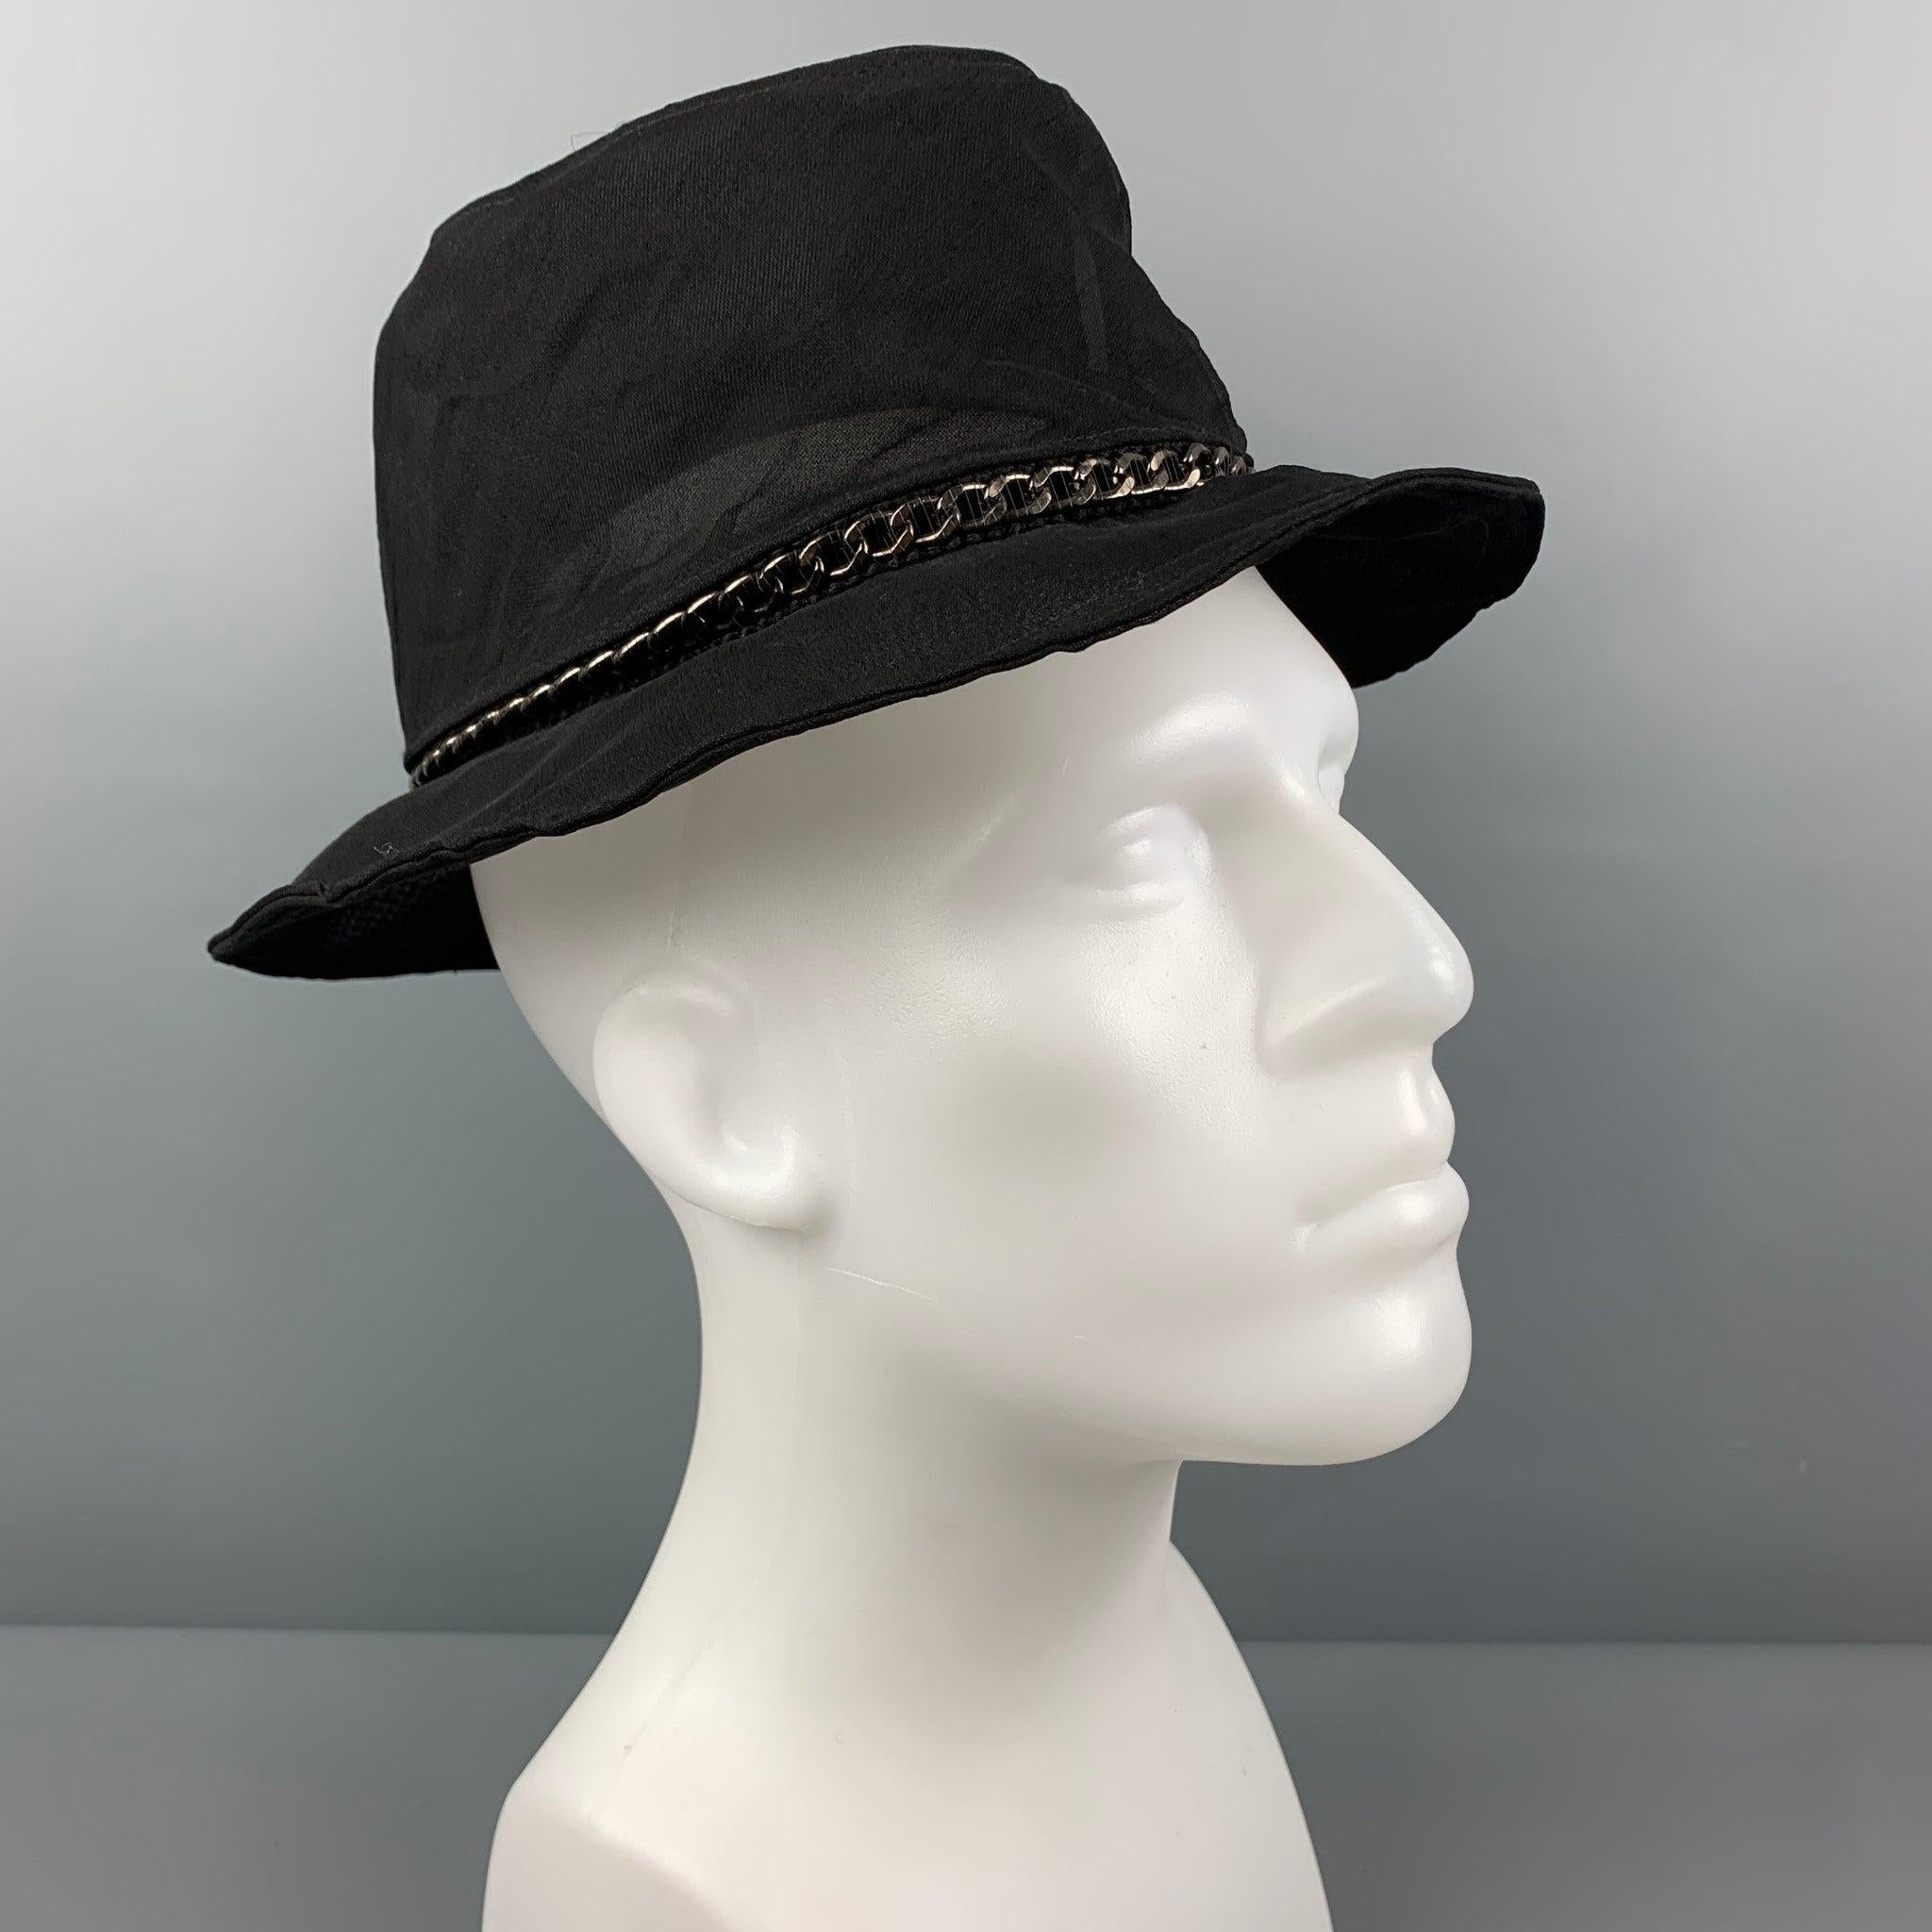 EMPORIO ARMANI bucket hat comes in a black see through silk featuring a chain link detail. Made in Italy.
New With Tags. 

Marked:   56 

Measurements: 
  Opening: 22 inches  Brim: 2.5 inches  Height: 3.75 inches 
  
  
 
Reference: 120517
Category: